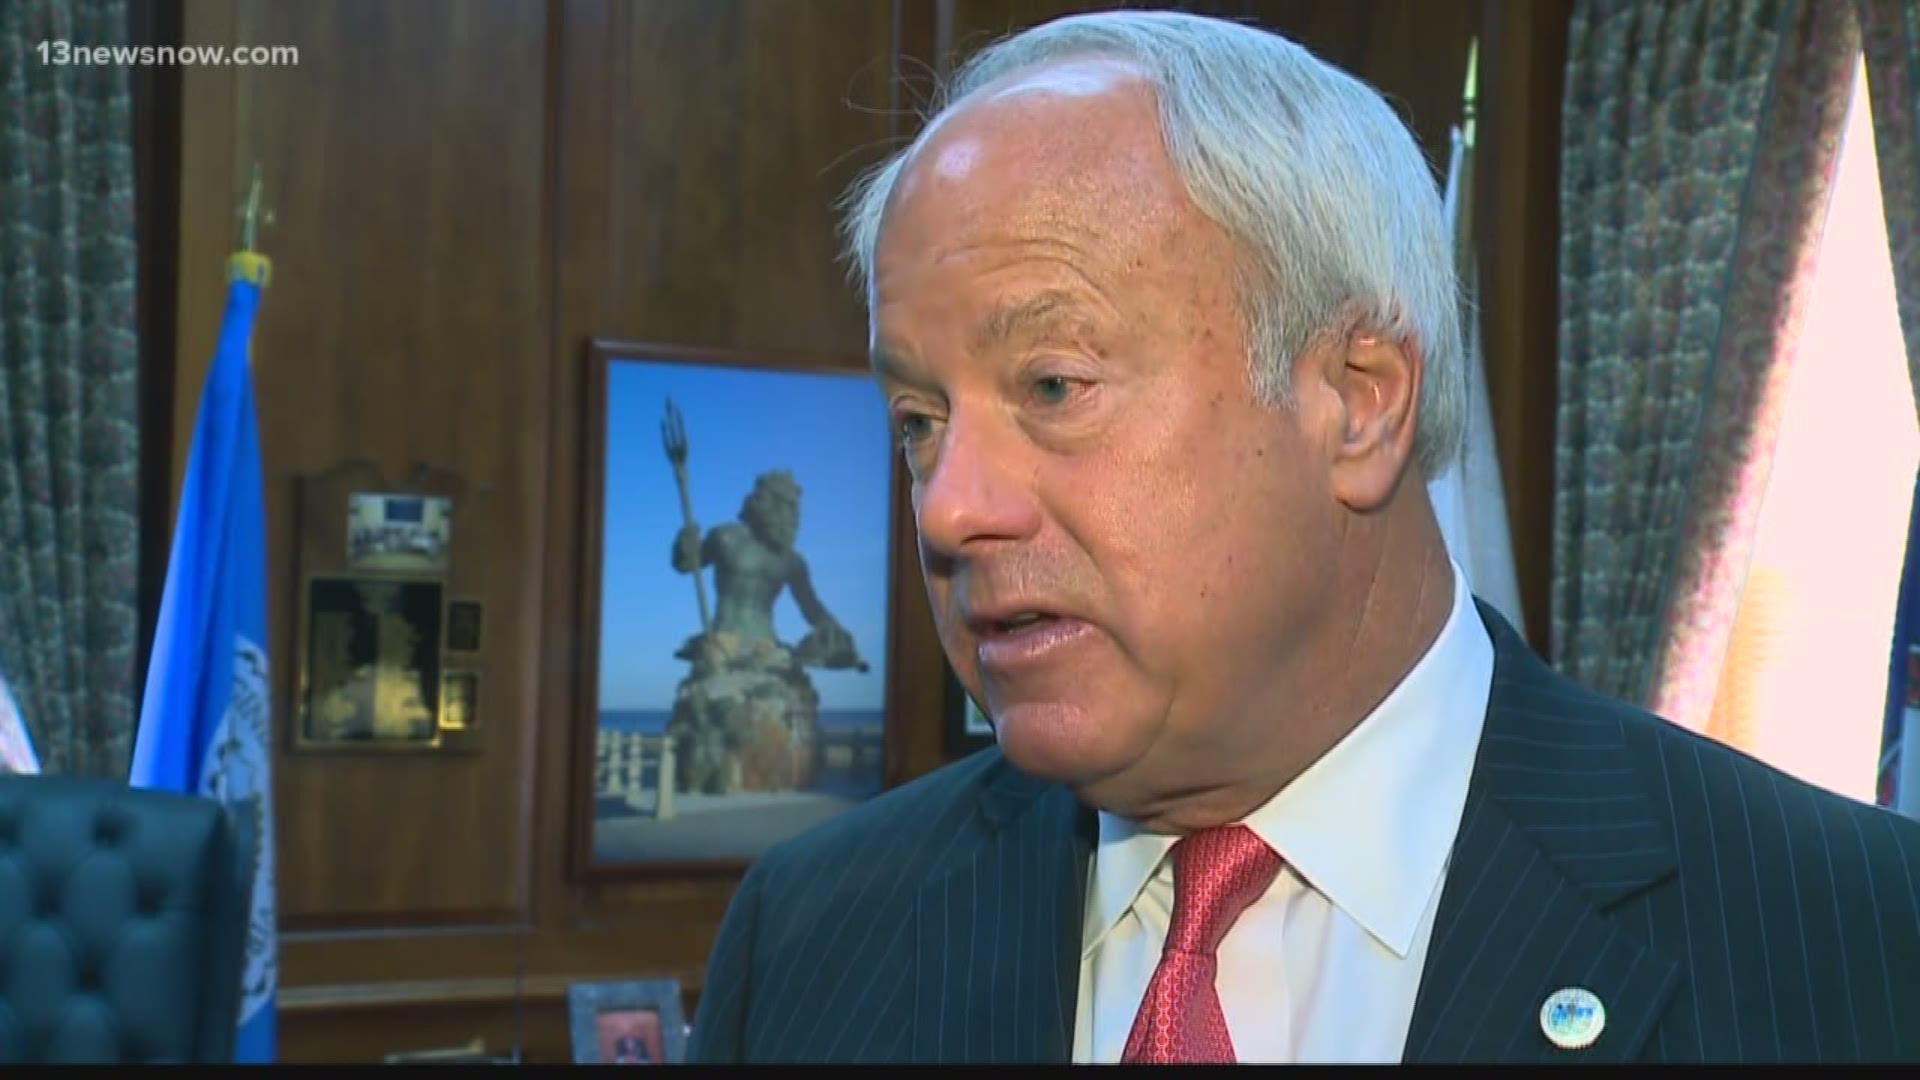 Virginia Beach Mayor Will Sessoms is resigning. Stepping down as of April 30th.